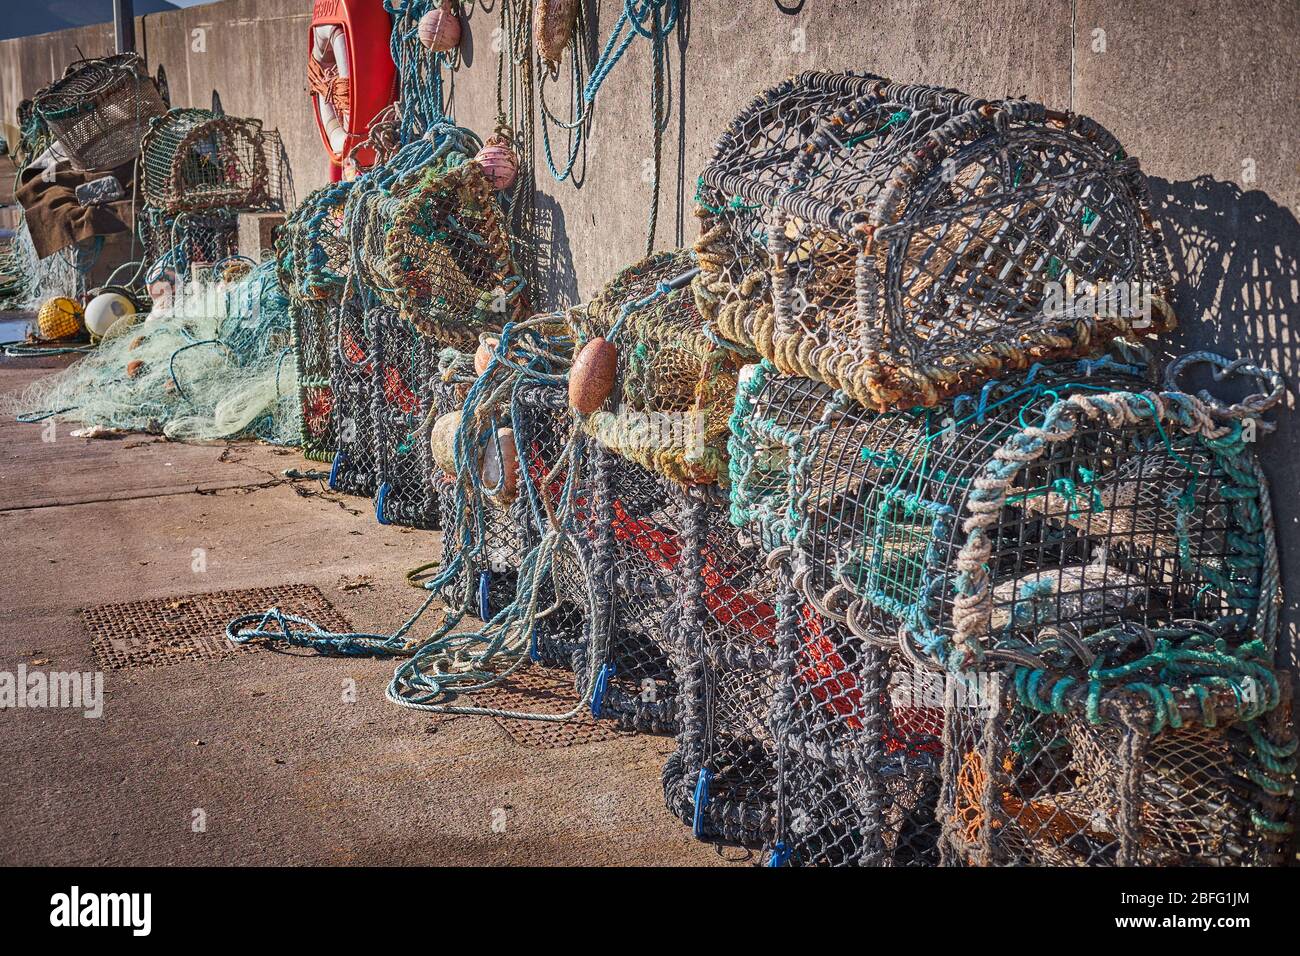 Lobster or crab fishing cages in colors stacked on a pier in the Dingle Peninsula, Ireland. Stock Photo